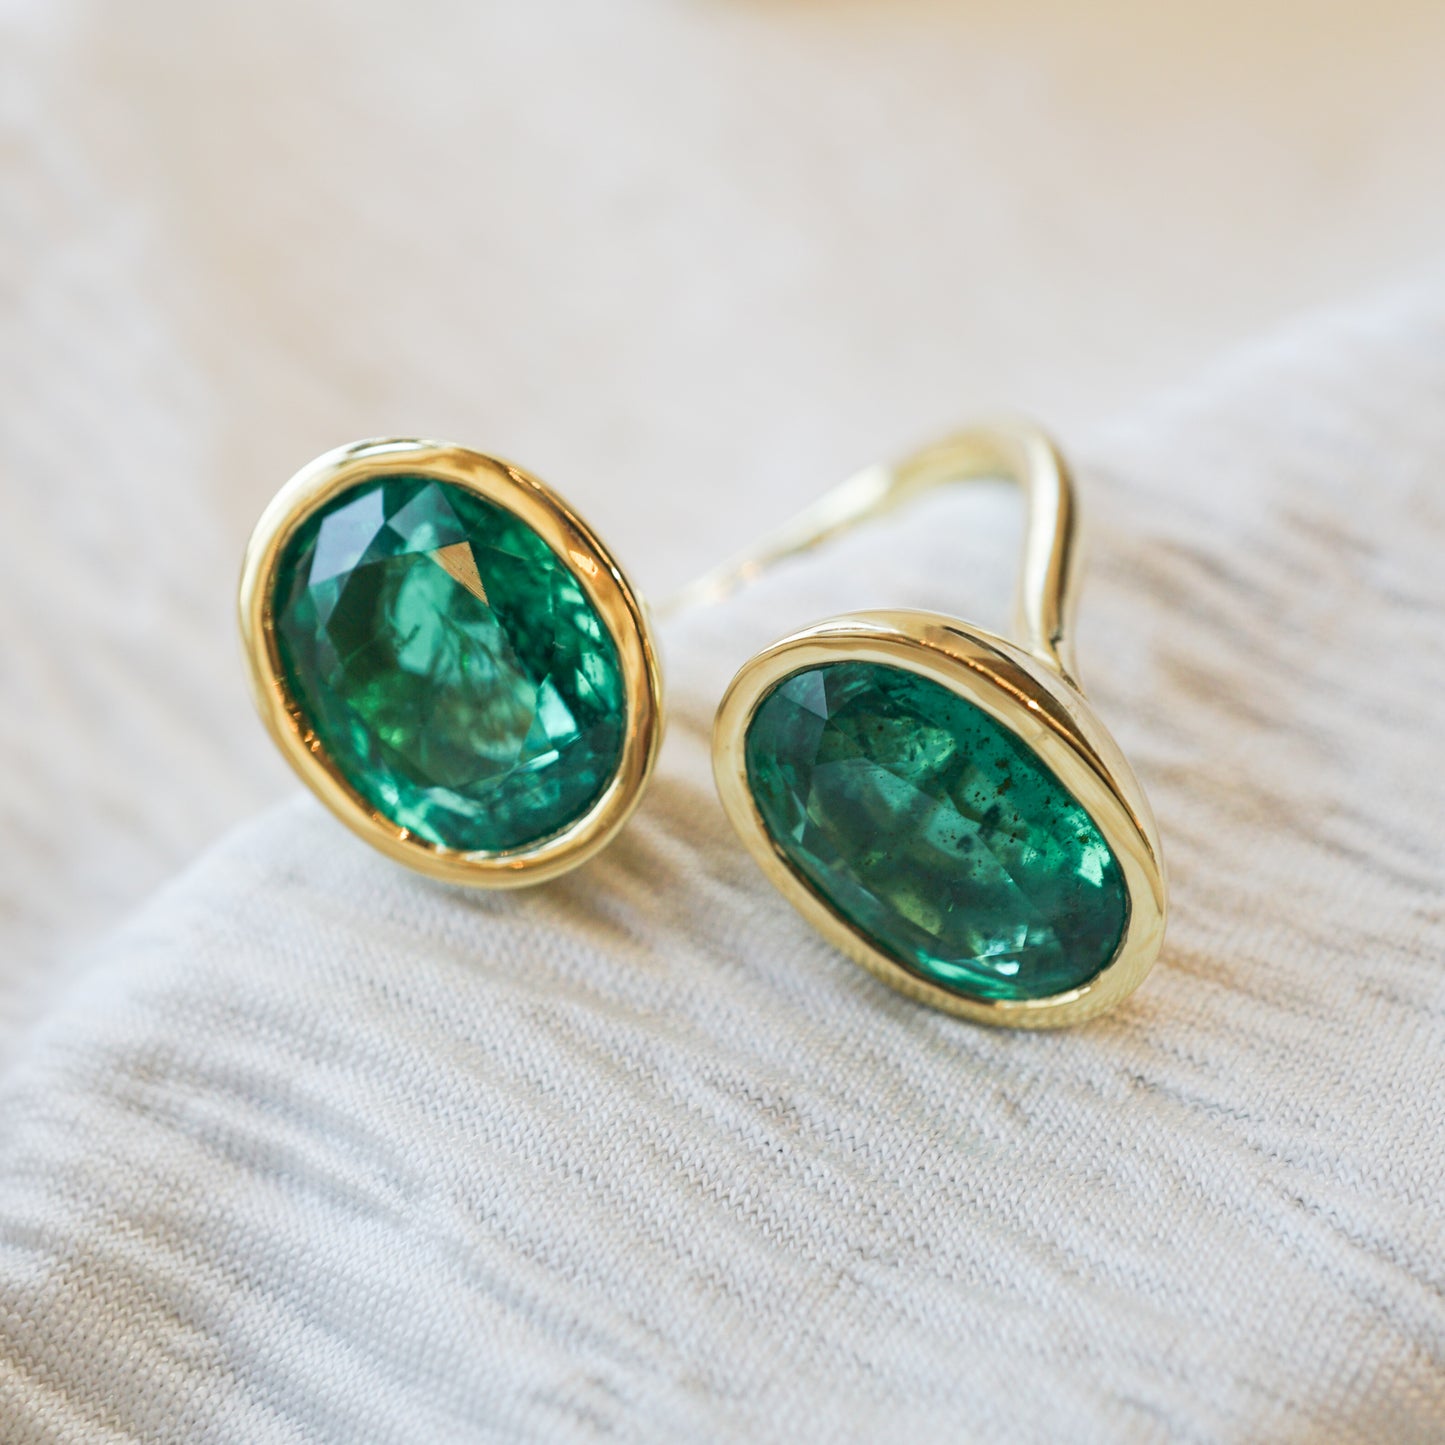 Double Oval Cut Emerald Cocktail Ring in 18k Yellow Gold